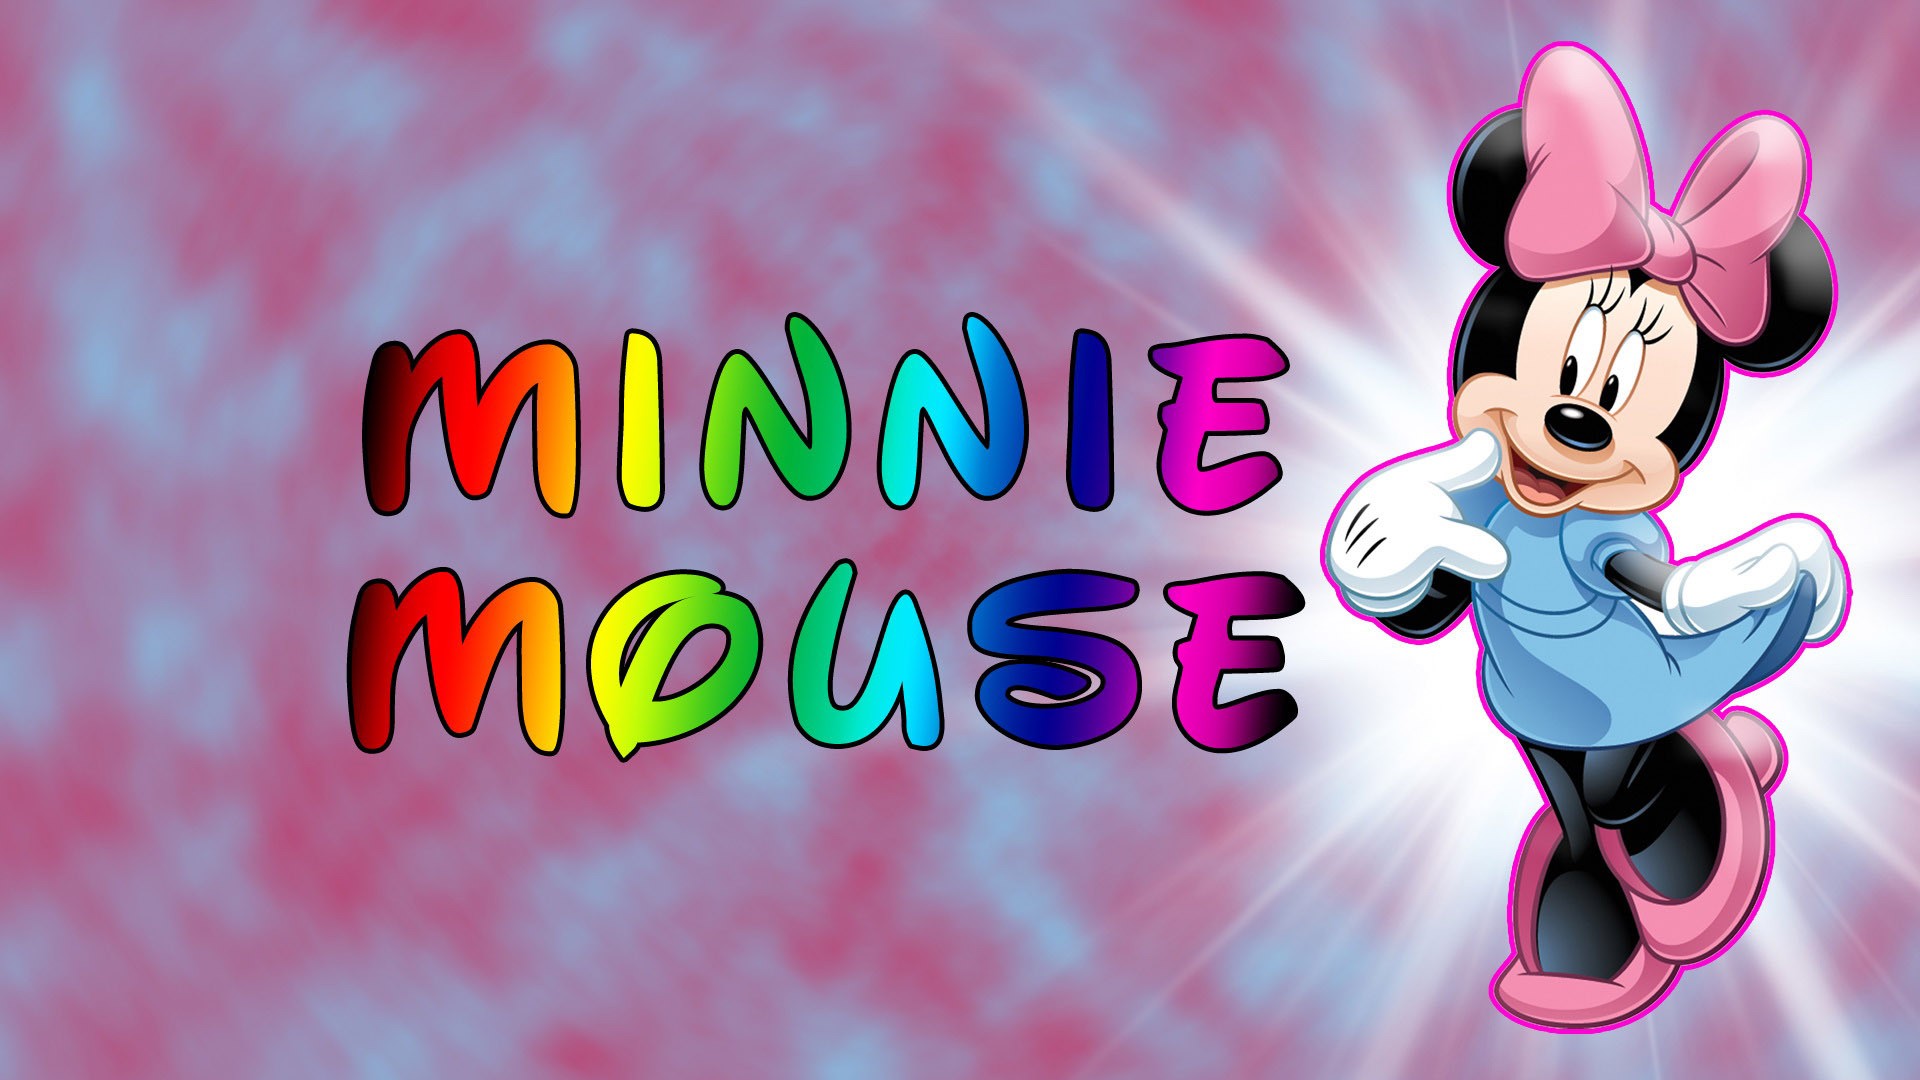 Download free minnie mouse games